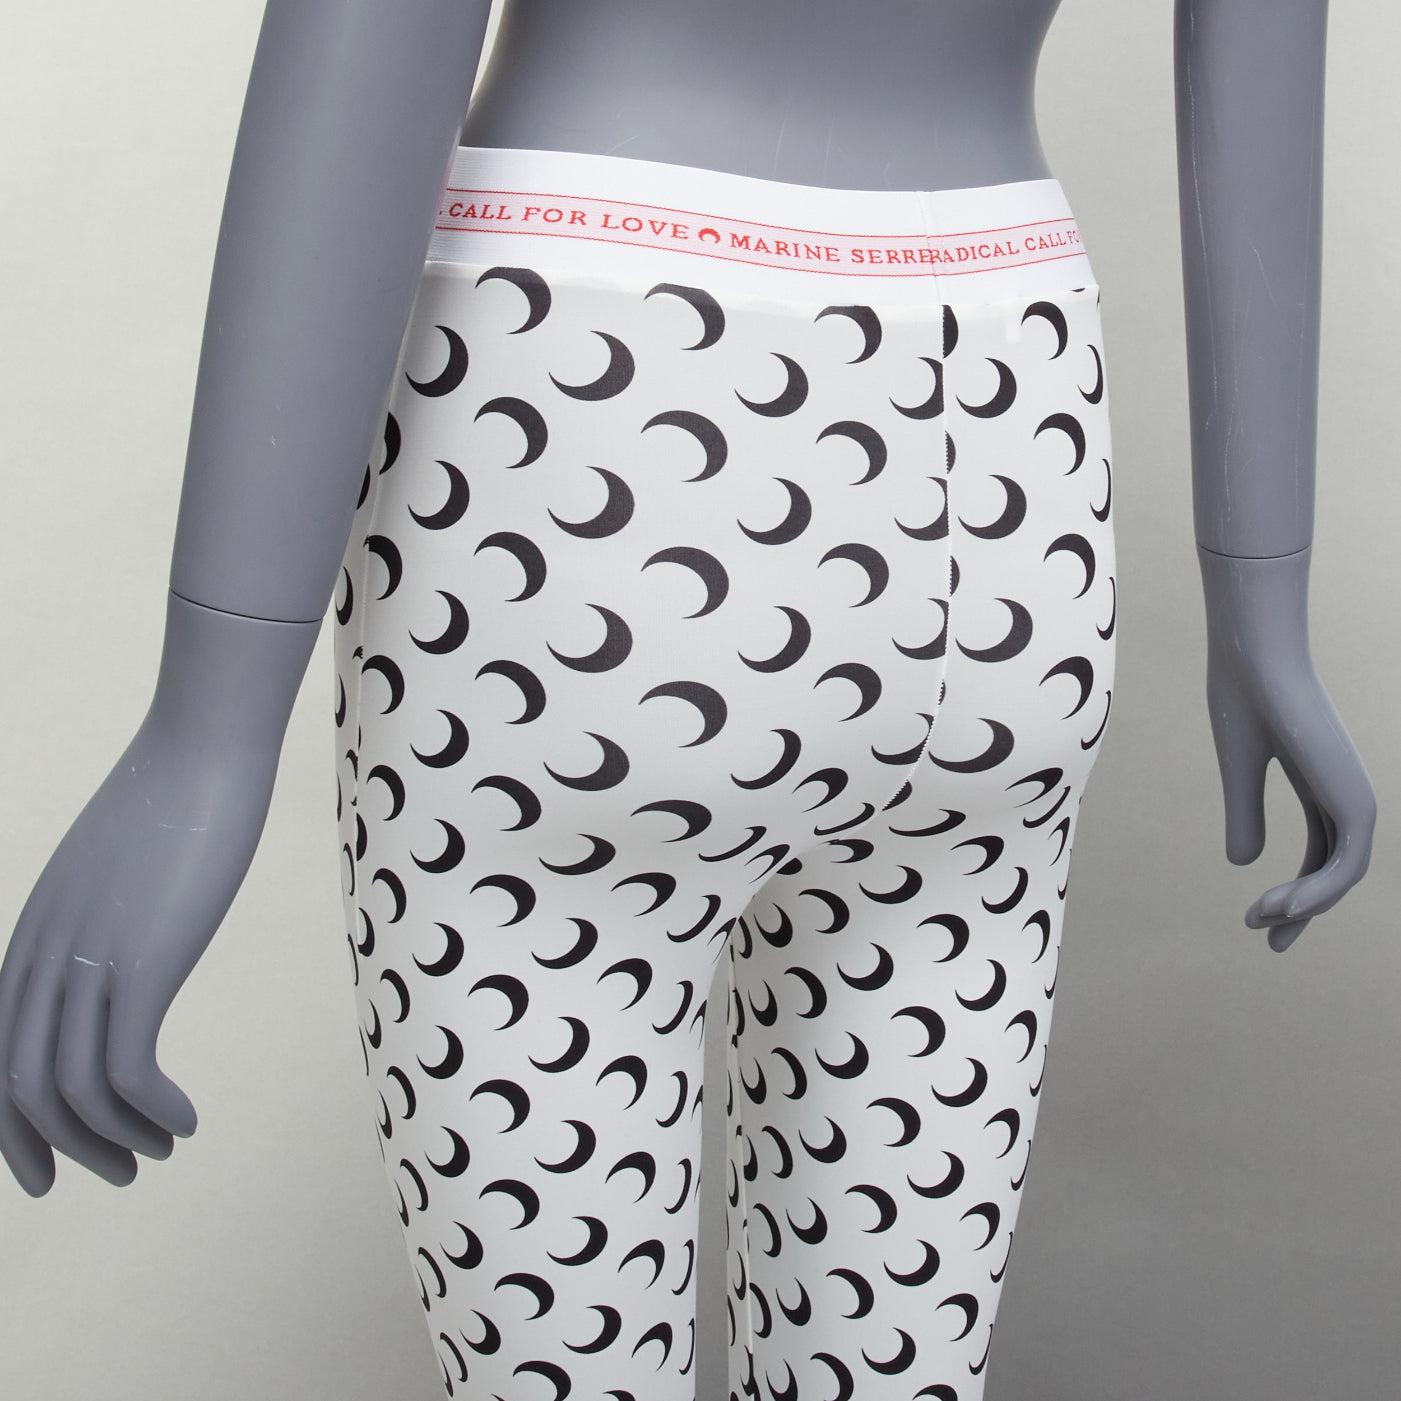 MARINE SERRE white black moon logo monogram waistband leggings S
Reference: BSHW/A00045
Brand: Marine Serre
As seen on: Ice Spice
Material: Polyamide, Blend
Color: White, Black
Pattern: Abstract
Closure: Elasticated
Made in: